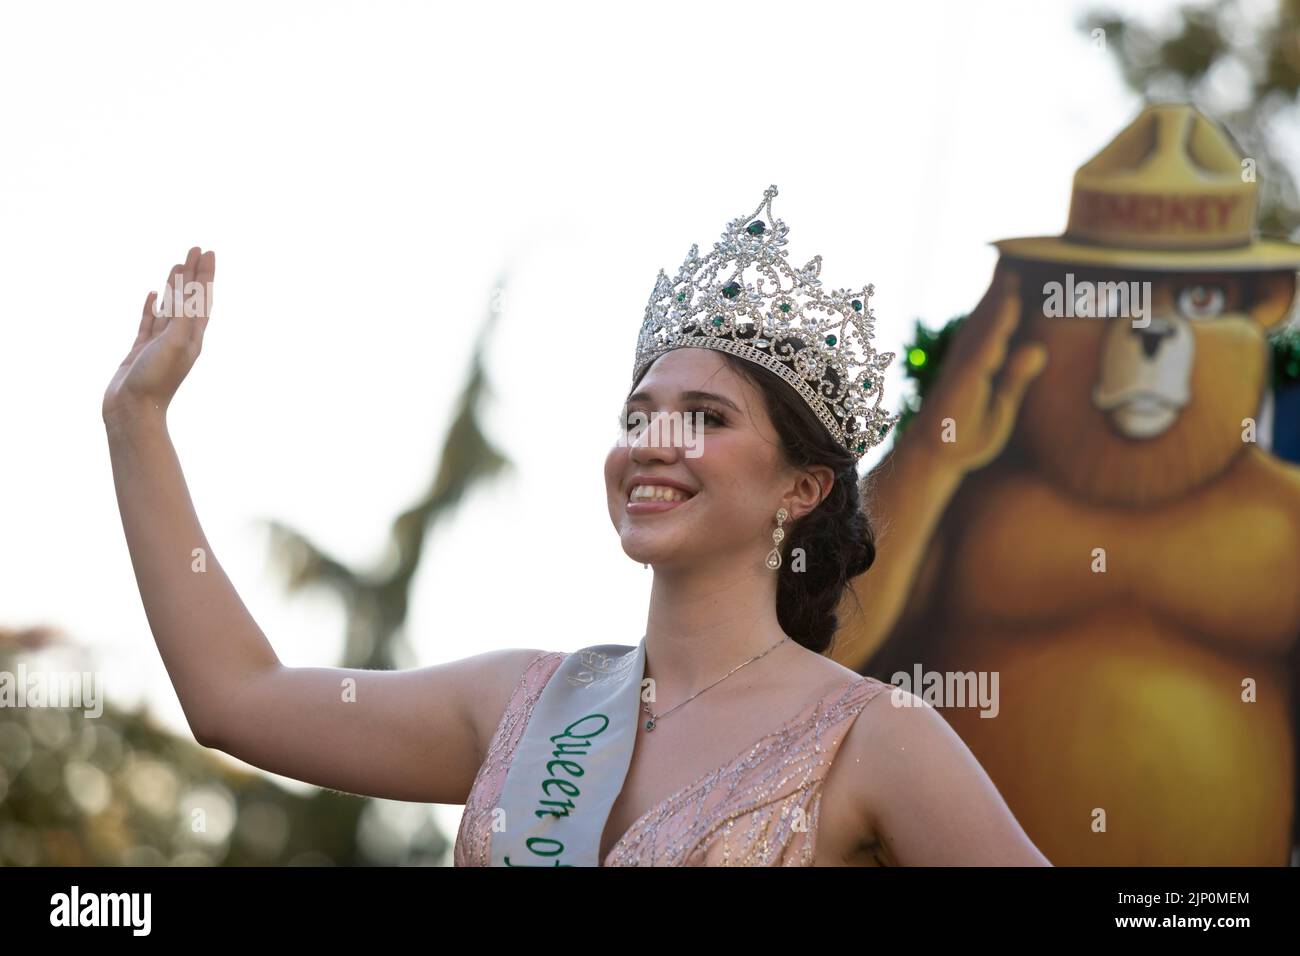 A member of the the Forest Festival Royalty serves as “Queen of the Forest” at the Seafair Torchlight Parade in Seattle on Saturday, July 30, 2022. Stock Photo